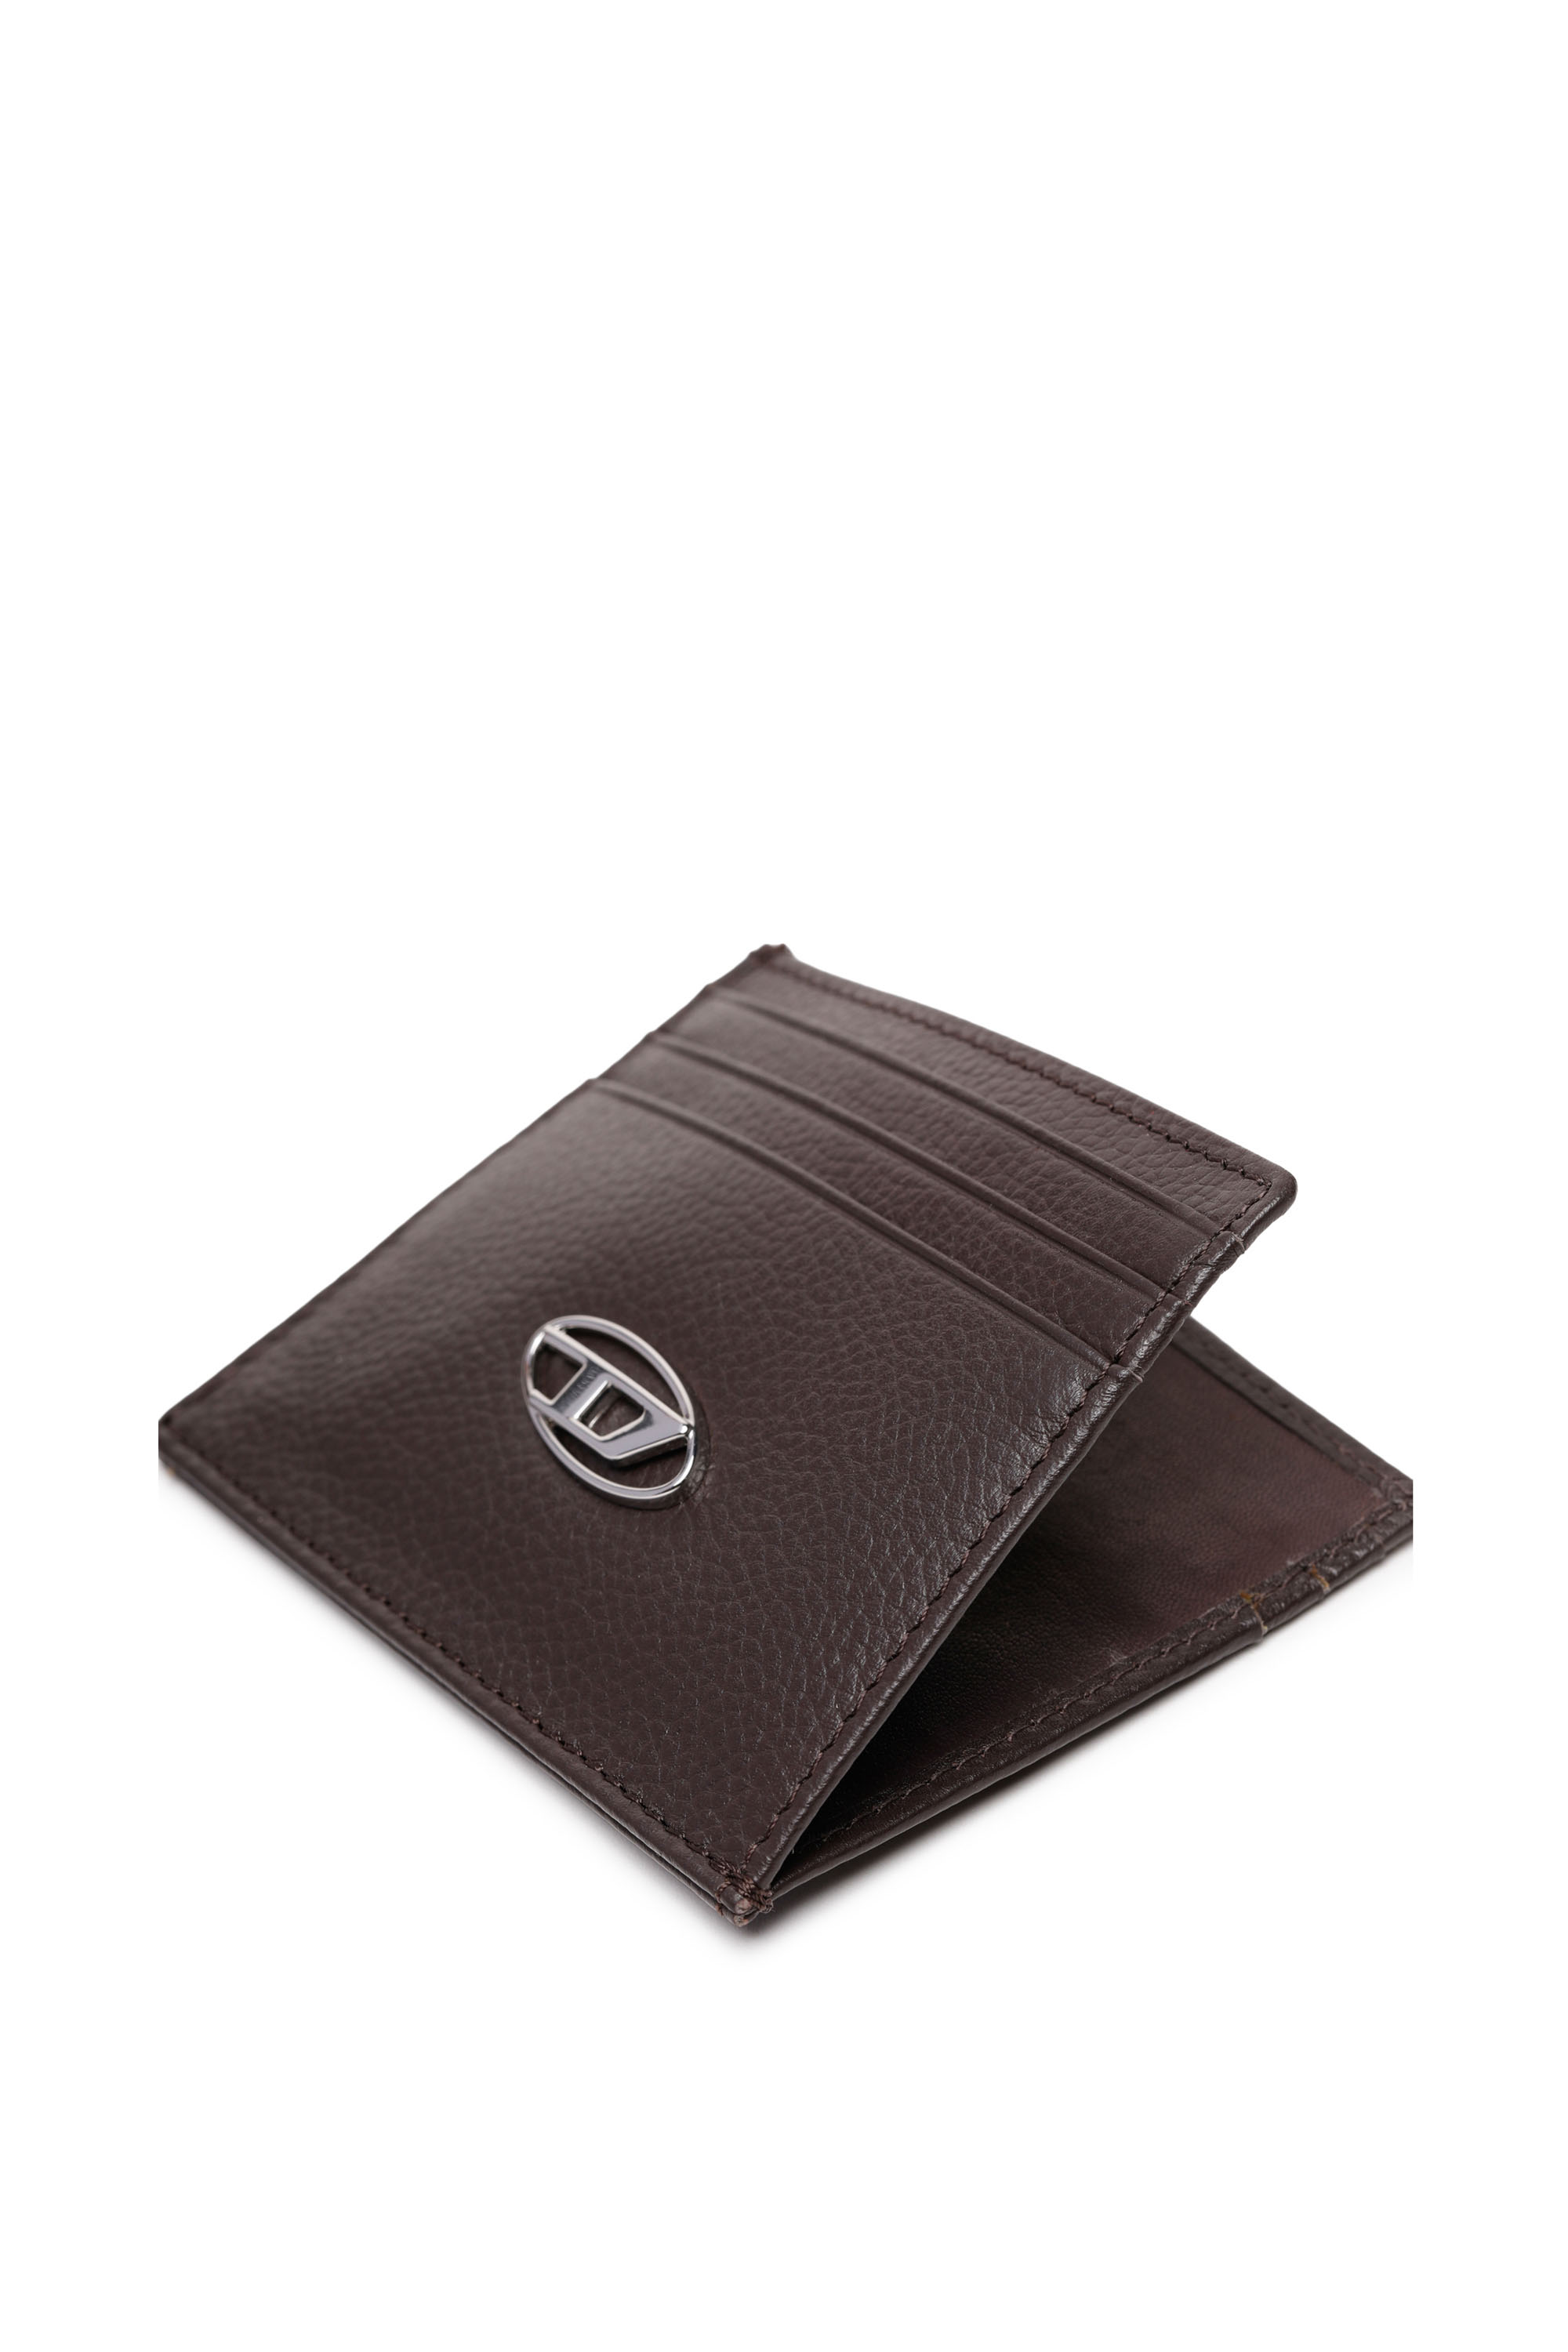 Mens Accessories Wallets and cardholders Save 51% DIESEL Leather Bi-fold Wallet With Suede Insert for Men 